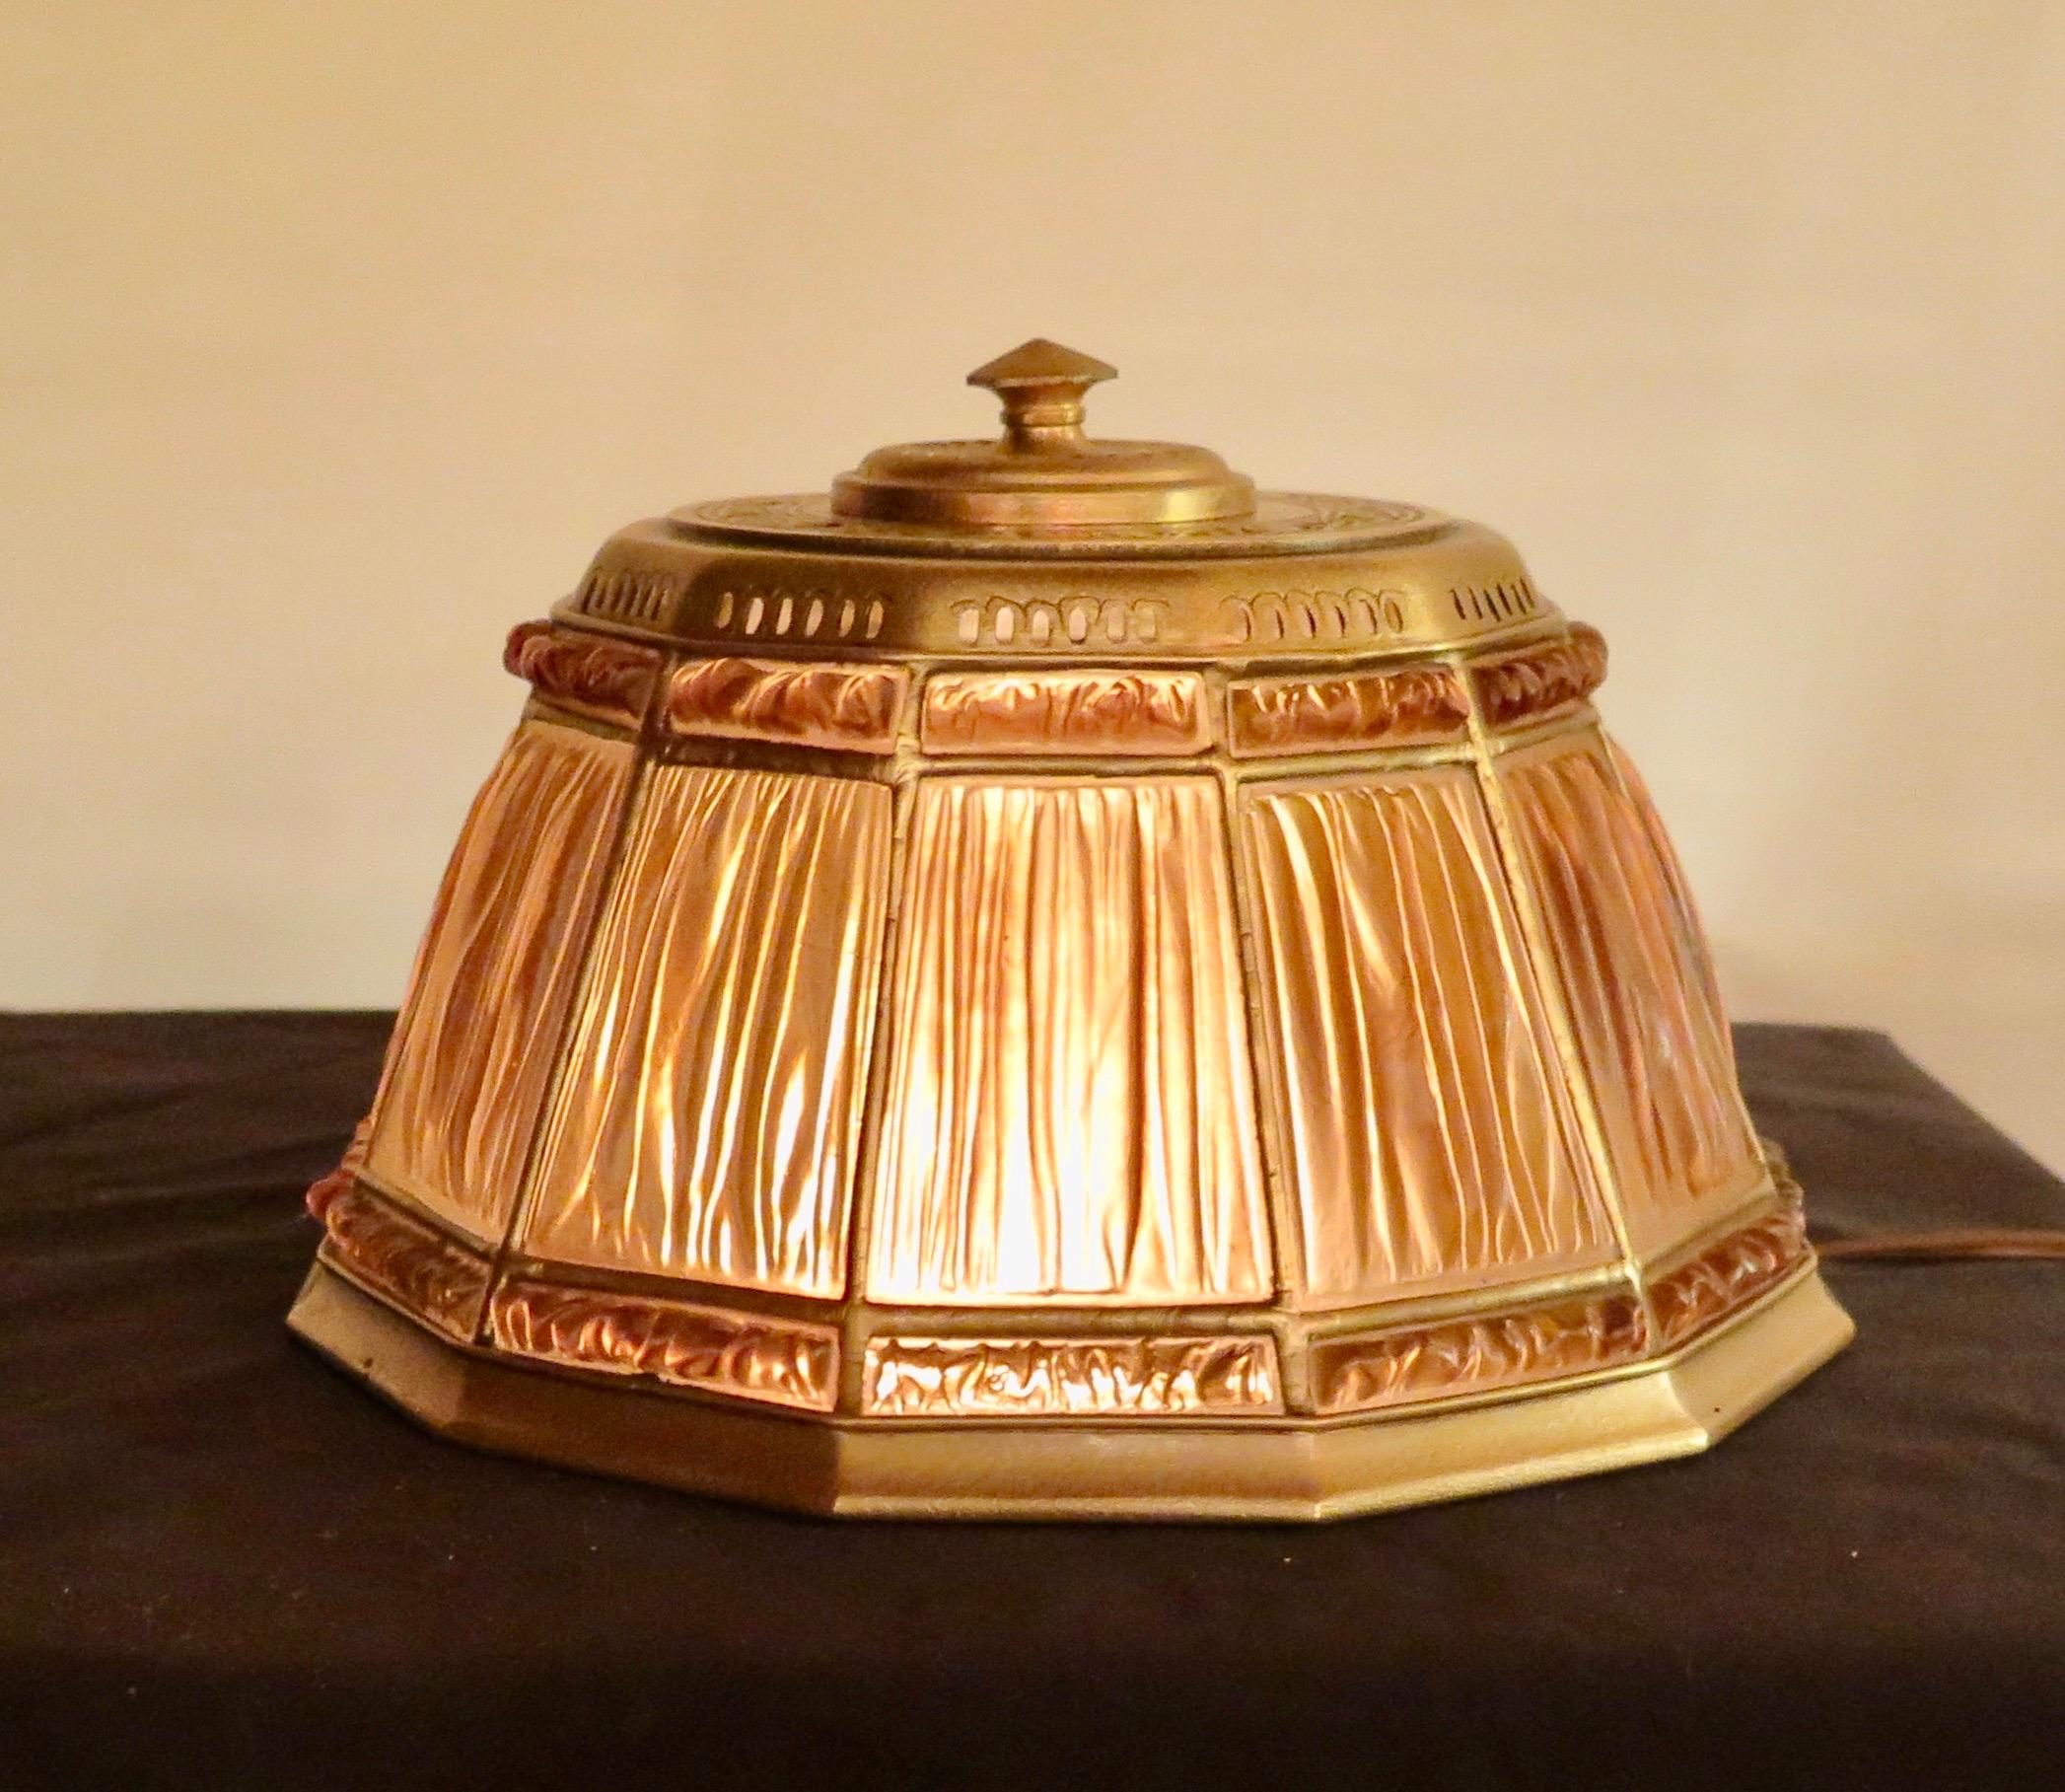 Vintage Tiffany Studios Linenfold 'Fabrique' Abalone Desk Lamp In Good Condition For Sale In Bronx, NY